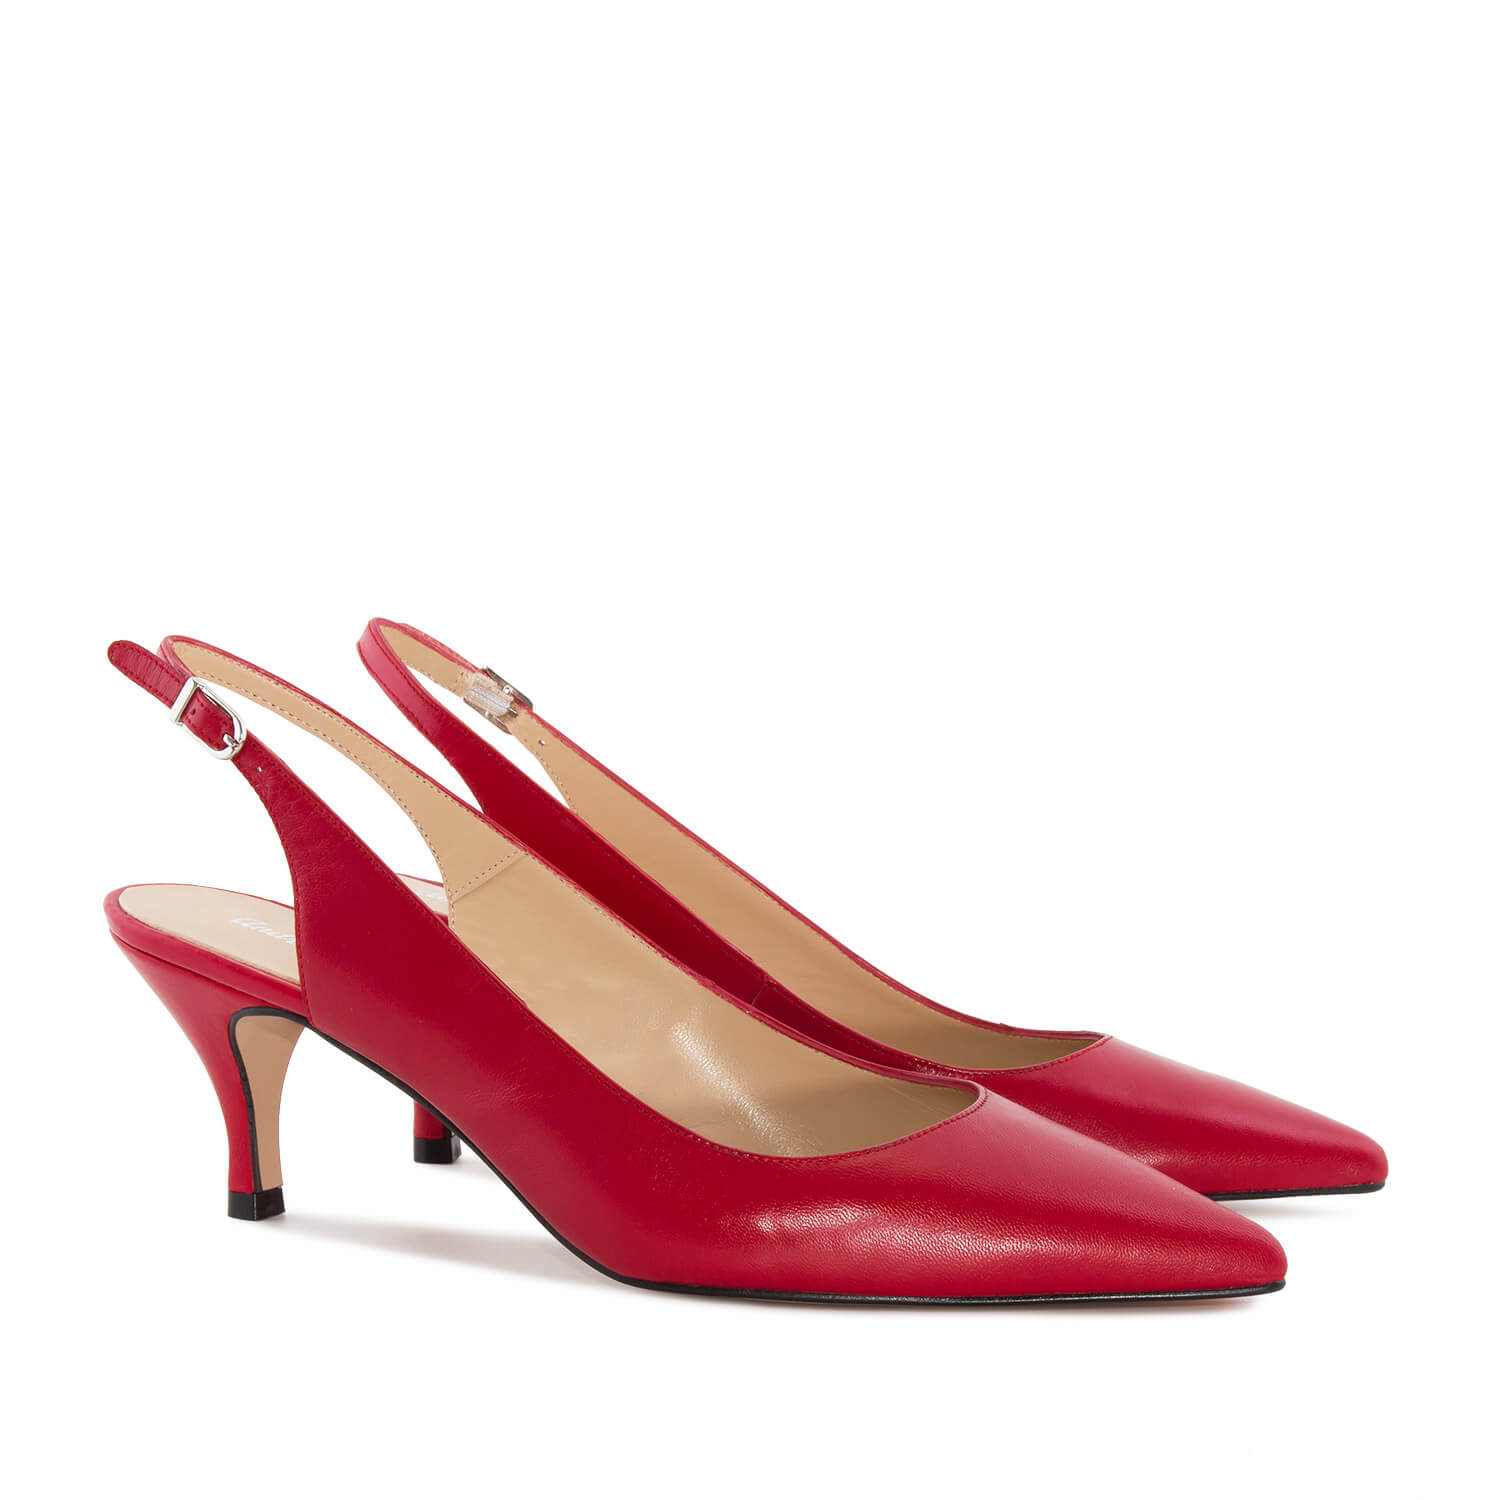 Fine Toe Slingback Shoes in Red Leather - Women, Exclusive Women ...